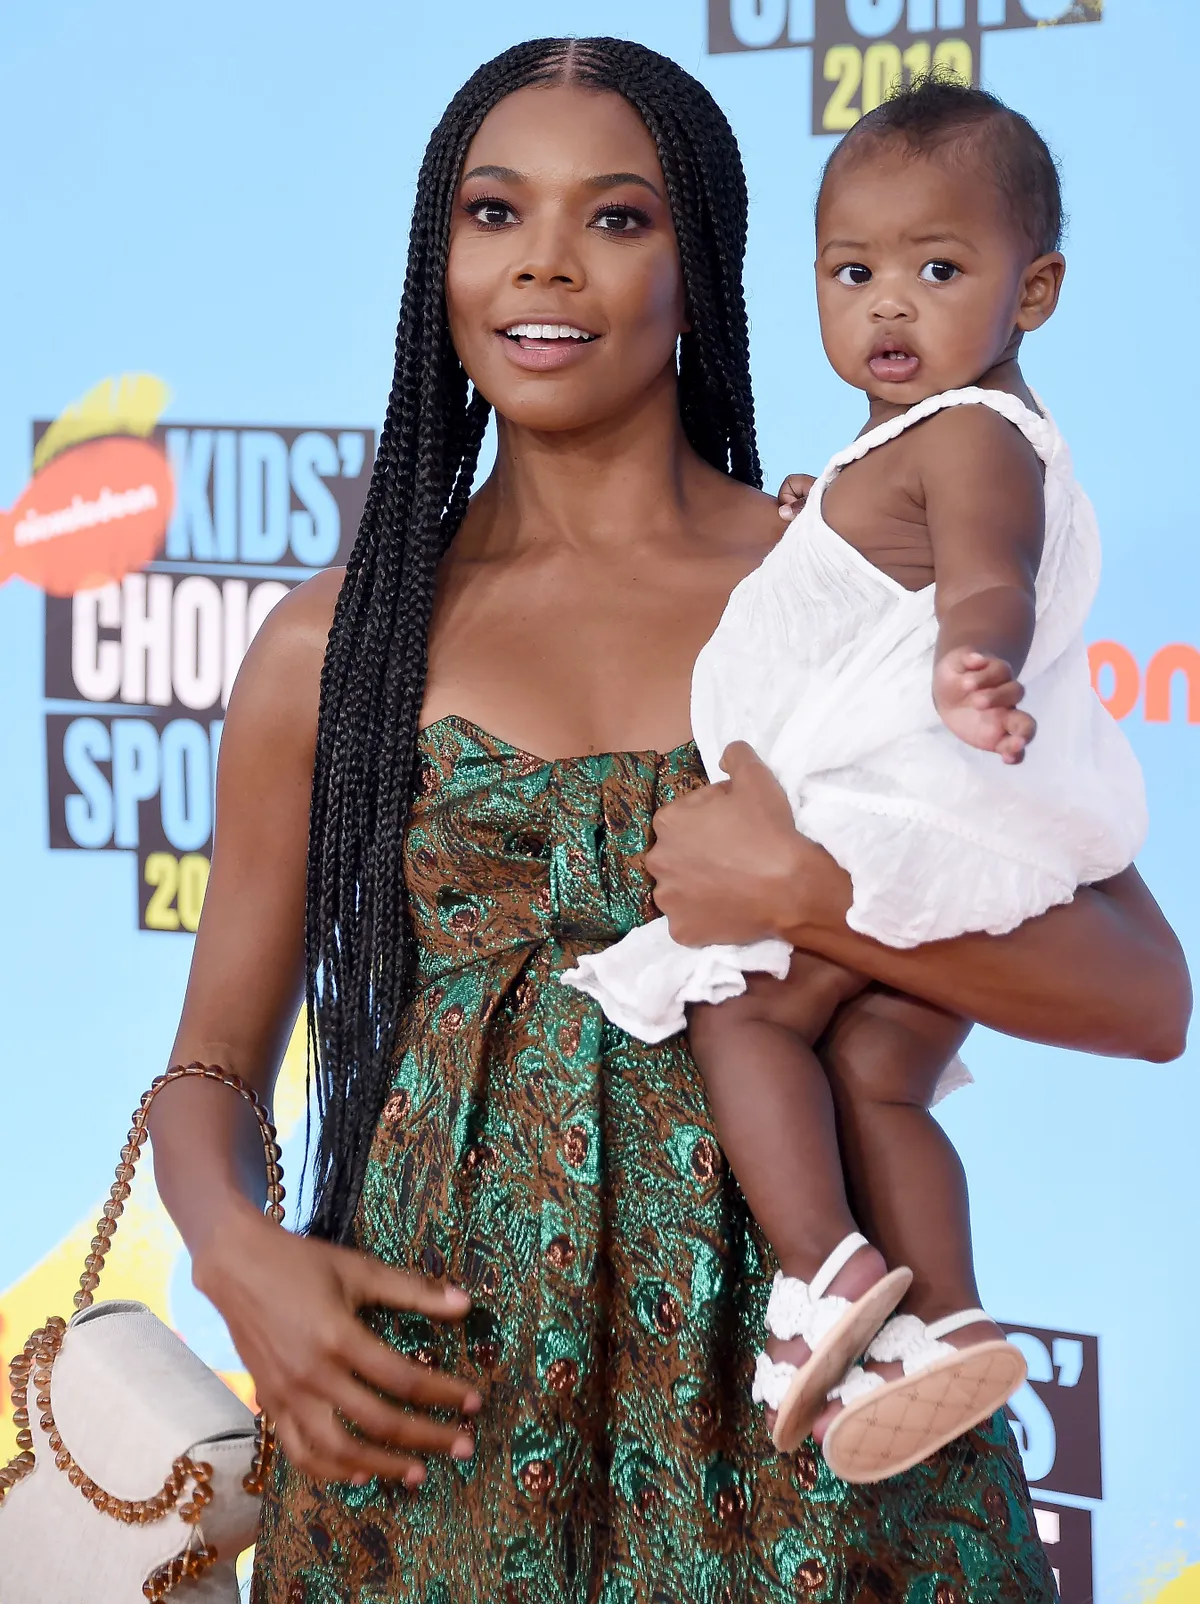 Gabrielle Union and her daughter Kaavia Wade at Nickelodeon Kids' Choice Sports 2019 on July 11, 2019 | Photo: Getty Images